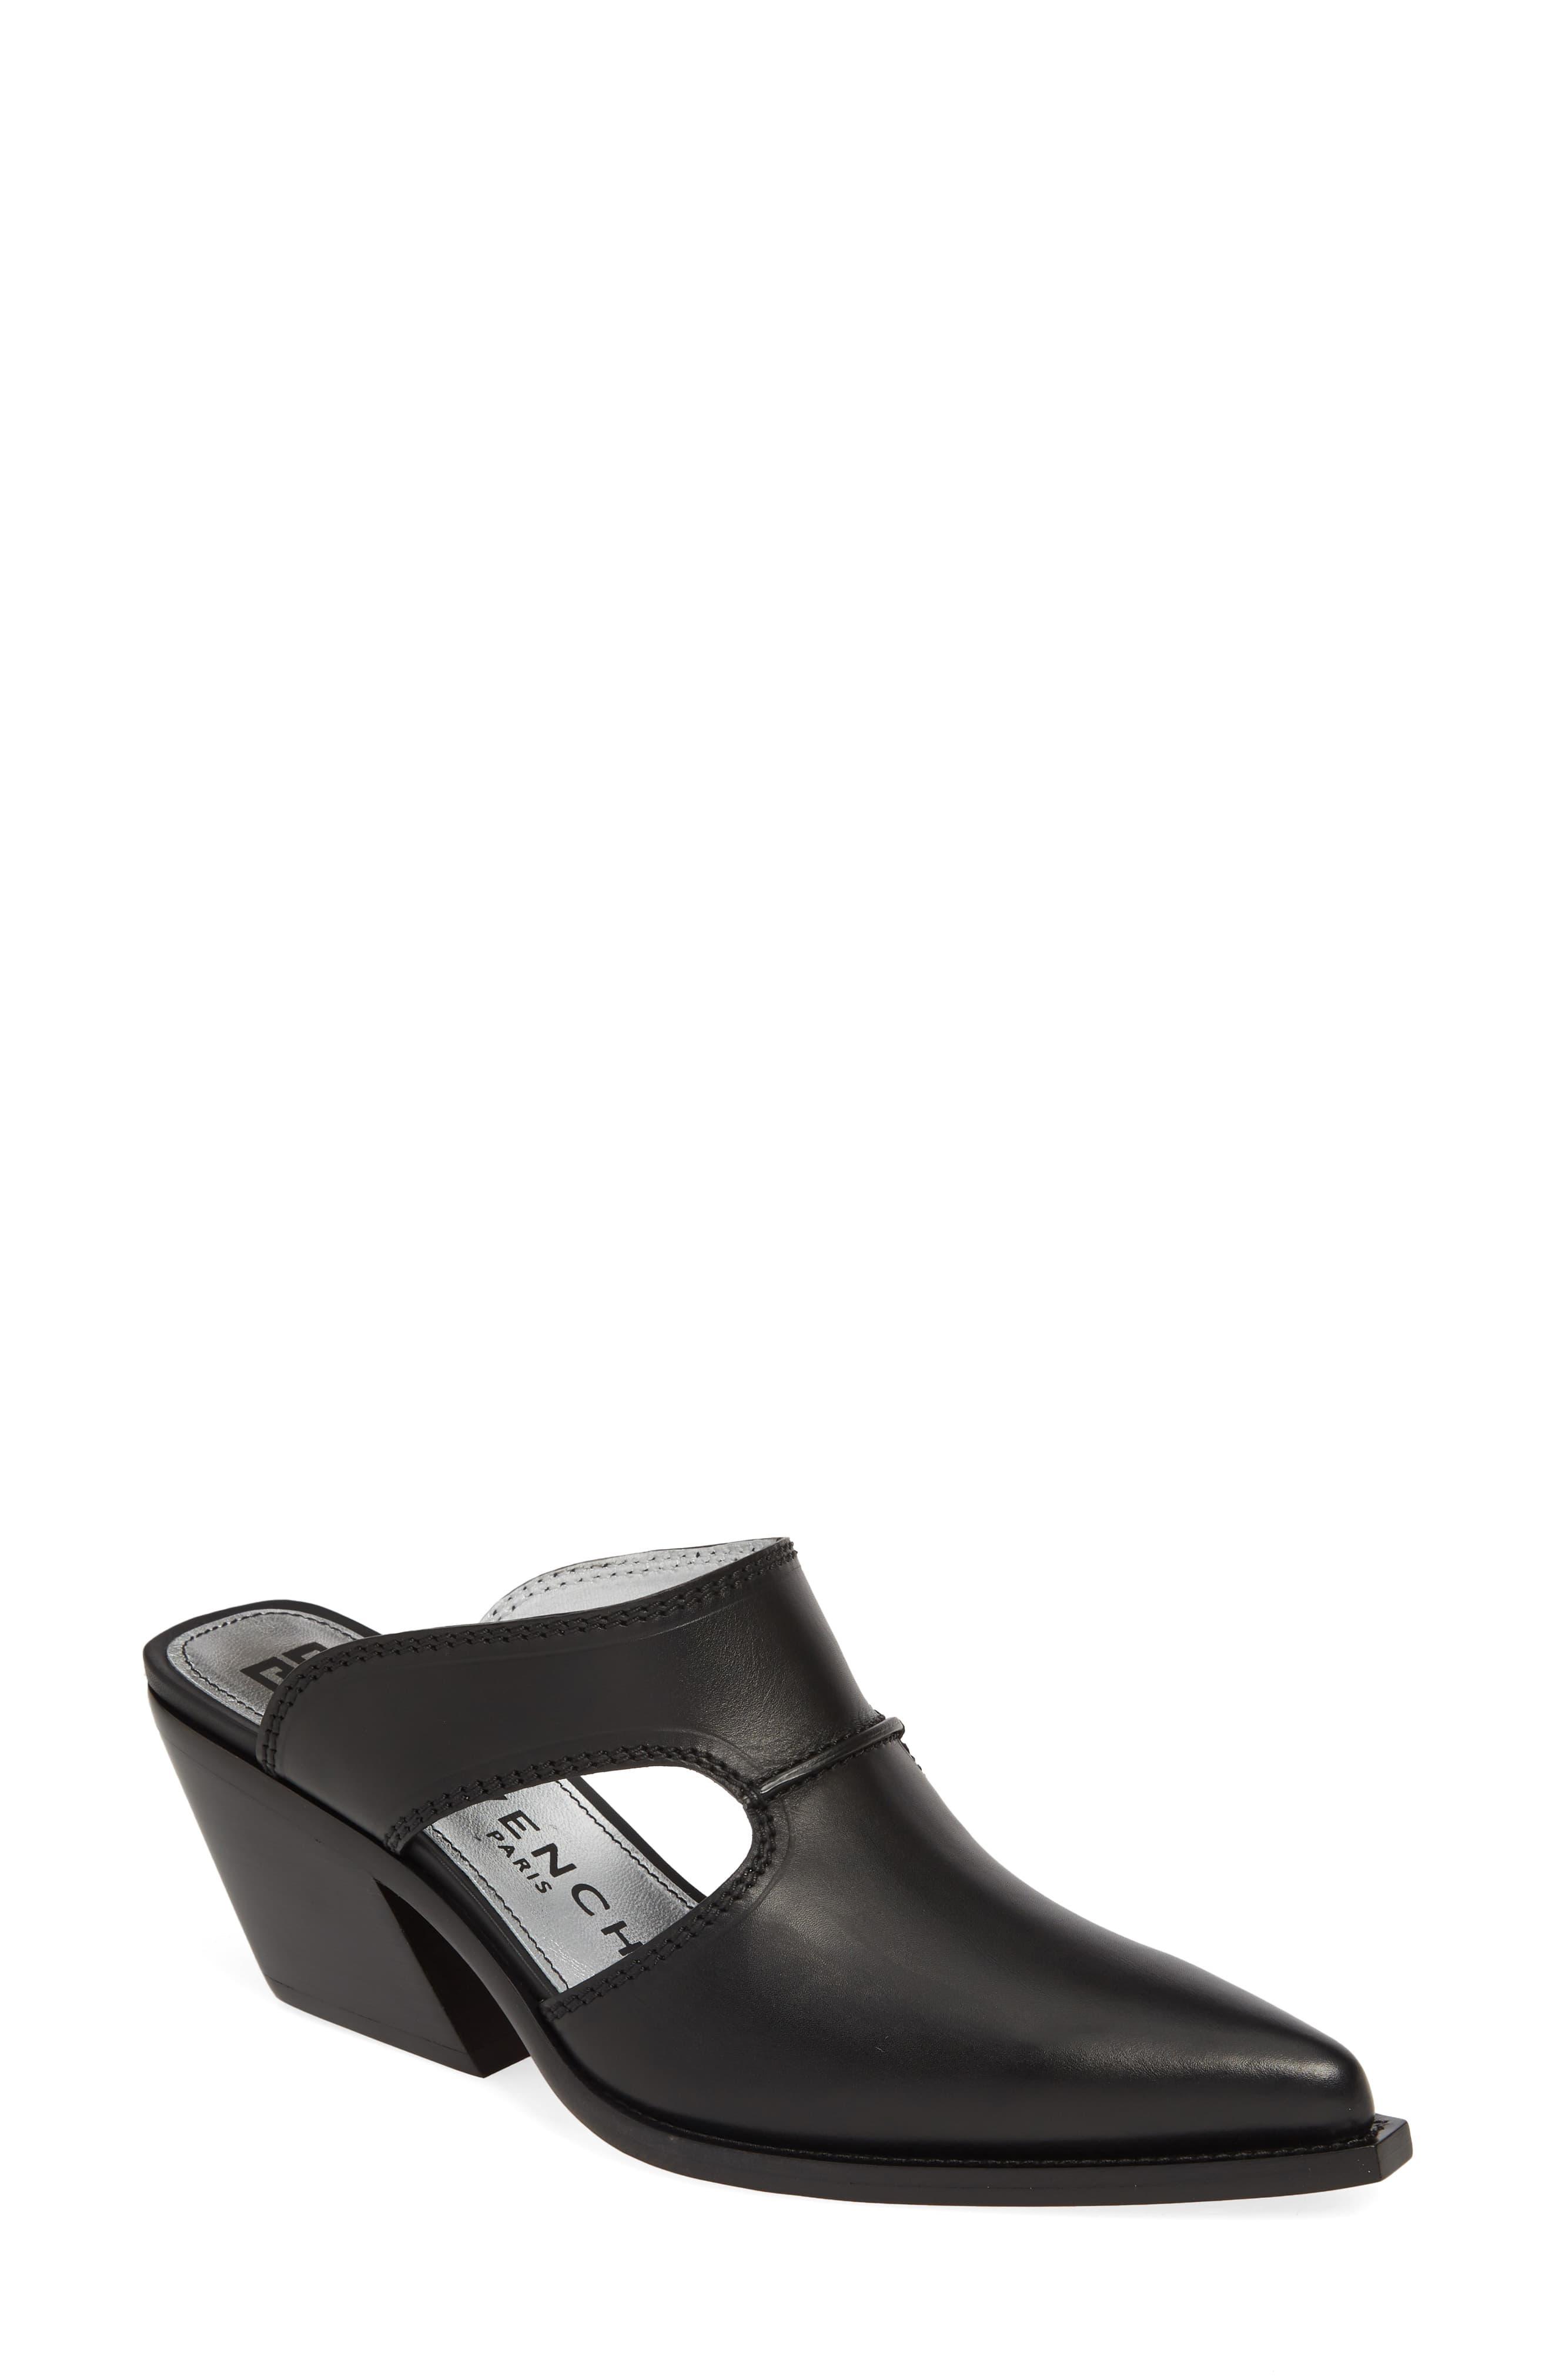 Givenchy Leather Cowboy Mule in Black 